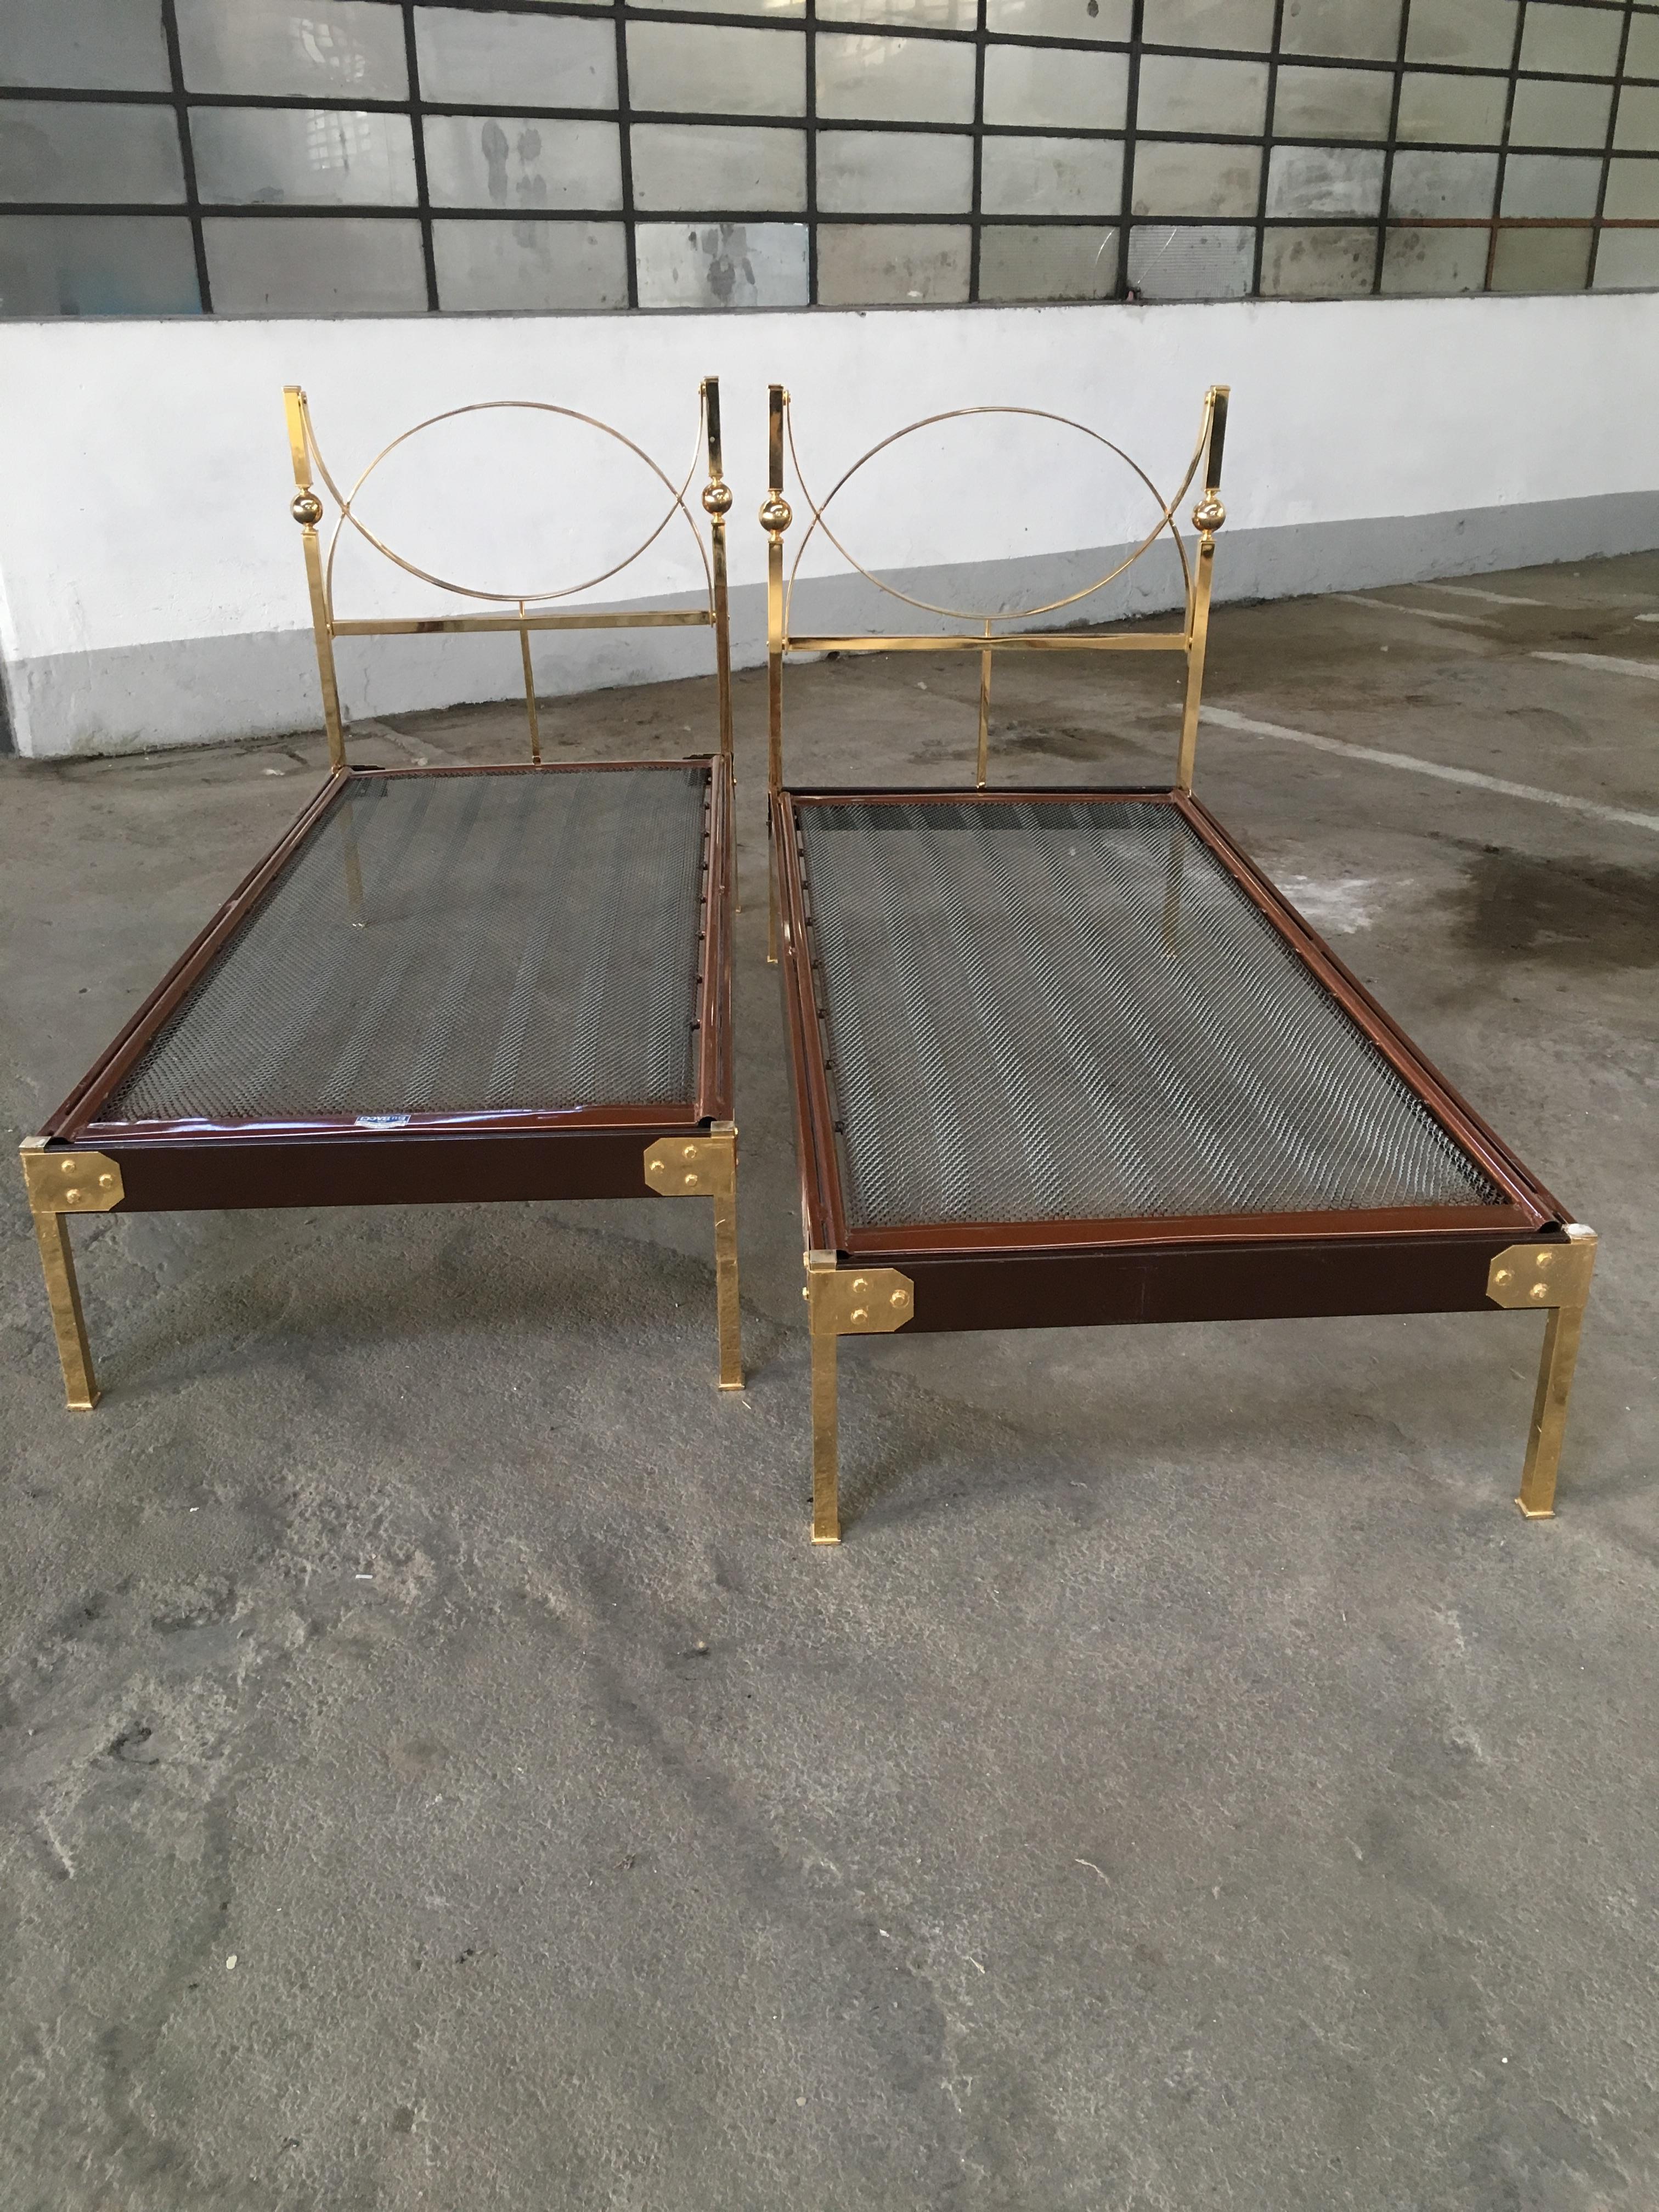 Mid-Century Modern pair of Italian single beds with gilt brass headboard and feet in the style of Carlo de Carli.
The beds need a mattress of cm. 80 x 190 each
One of the beds misses a short bar under the headboard as shown in the photo. Is possible